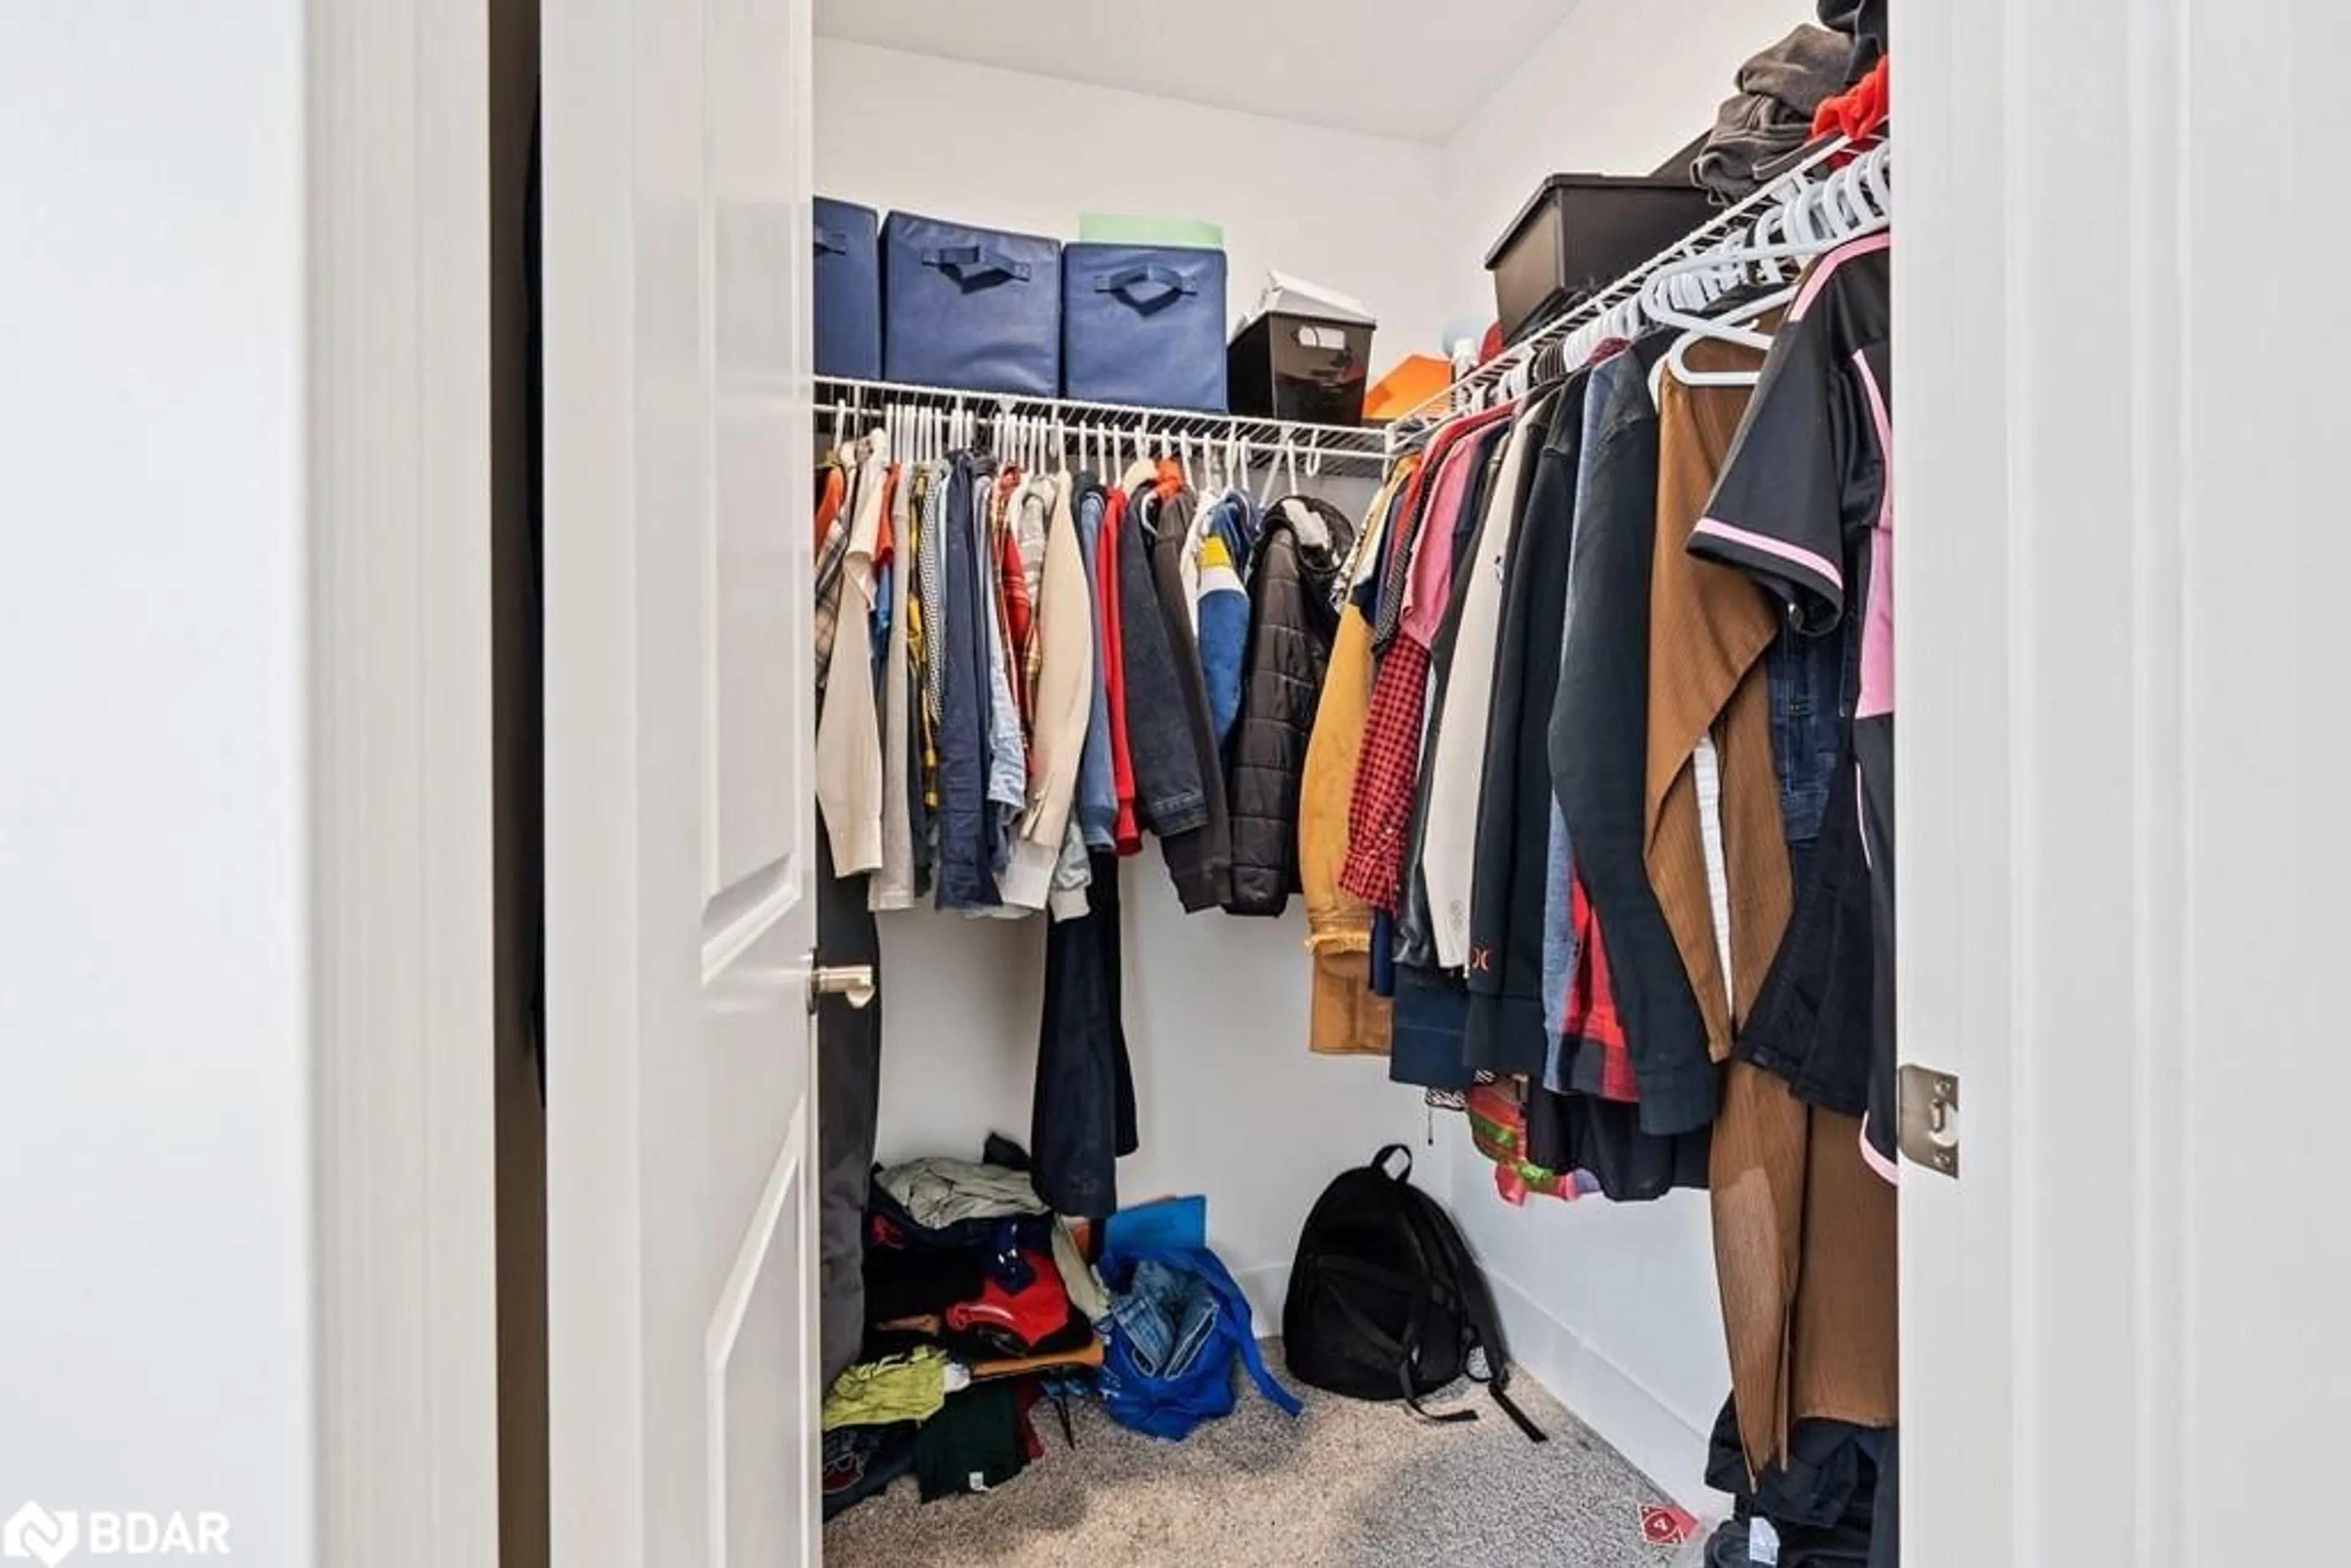 Storage room or clothes room or walk-in closet for 2105 Tokala Trail, London Ontario N6G 3X7